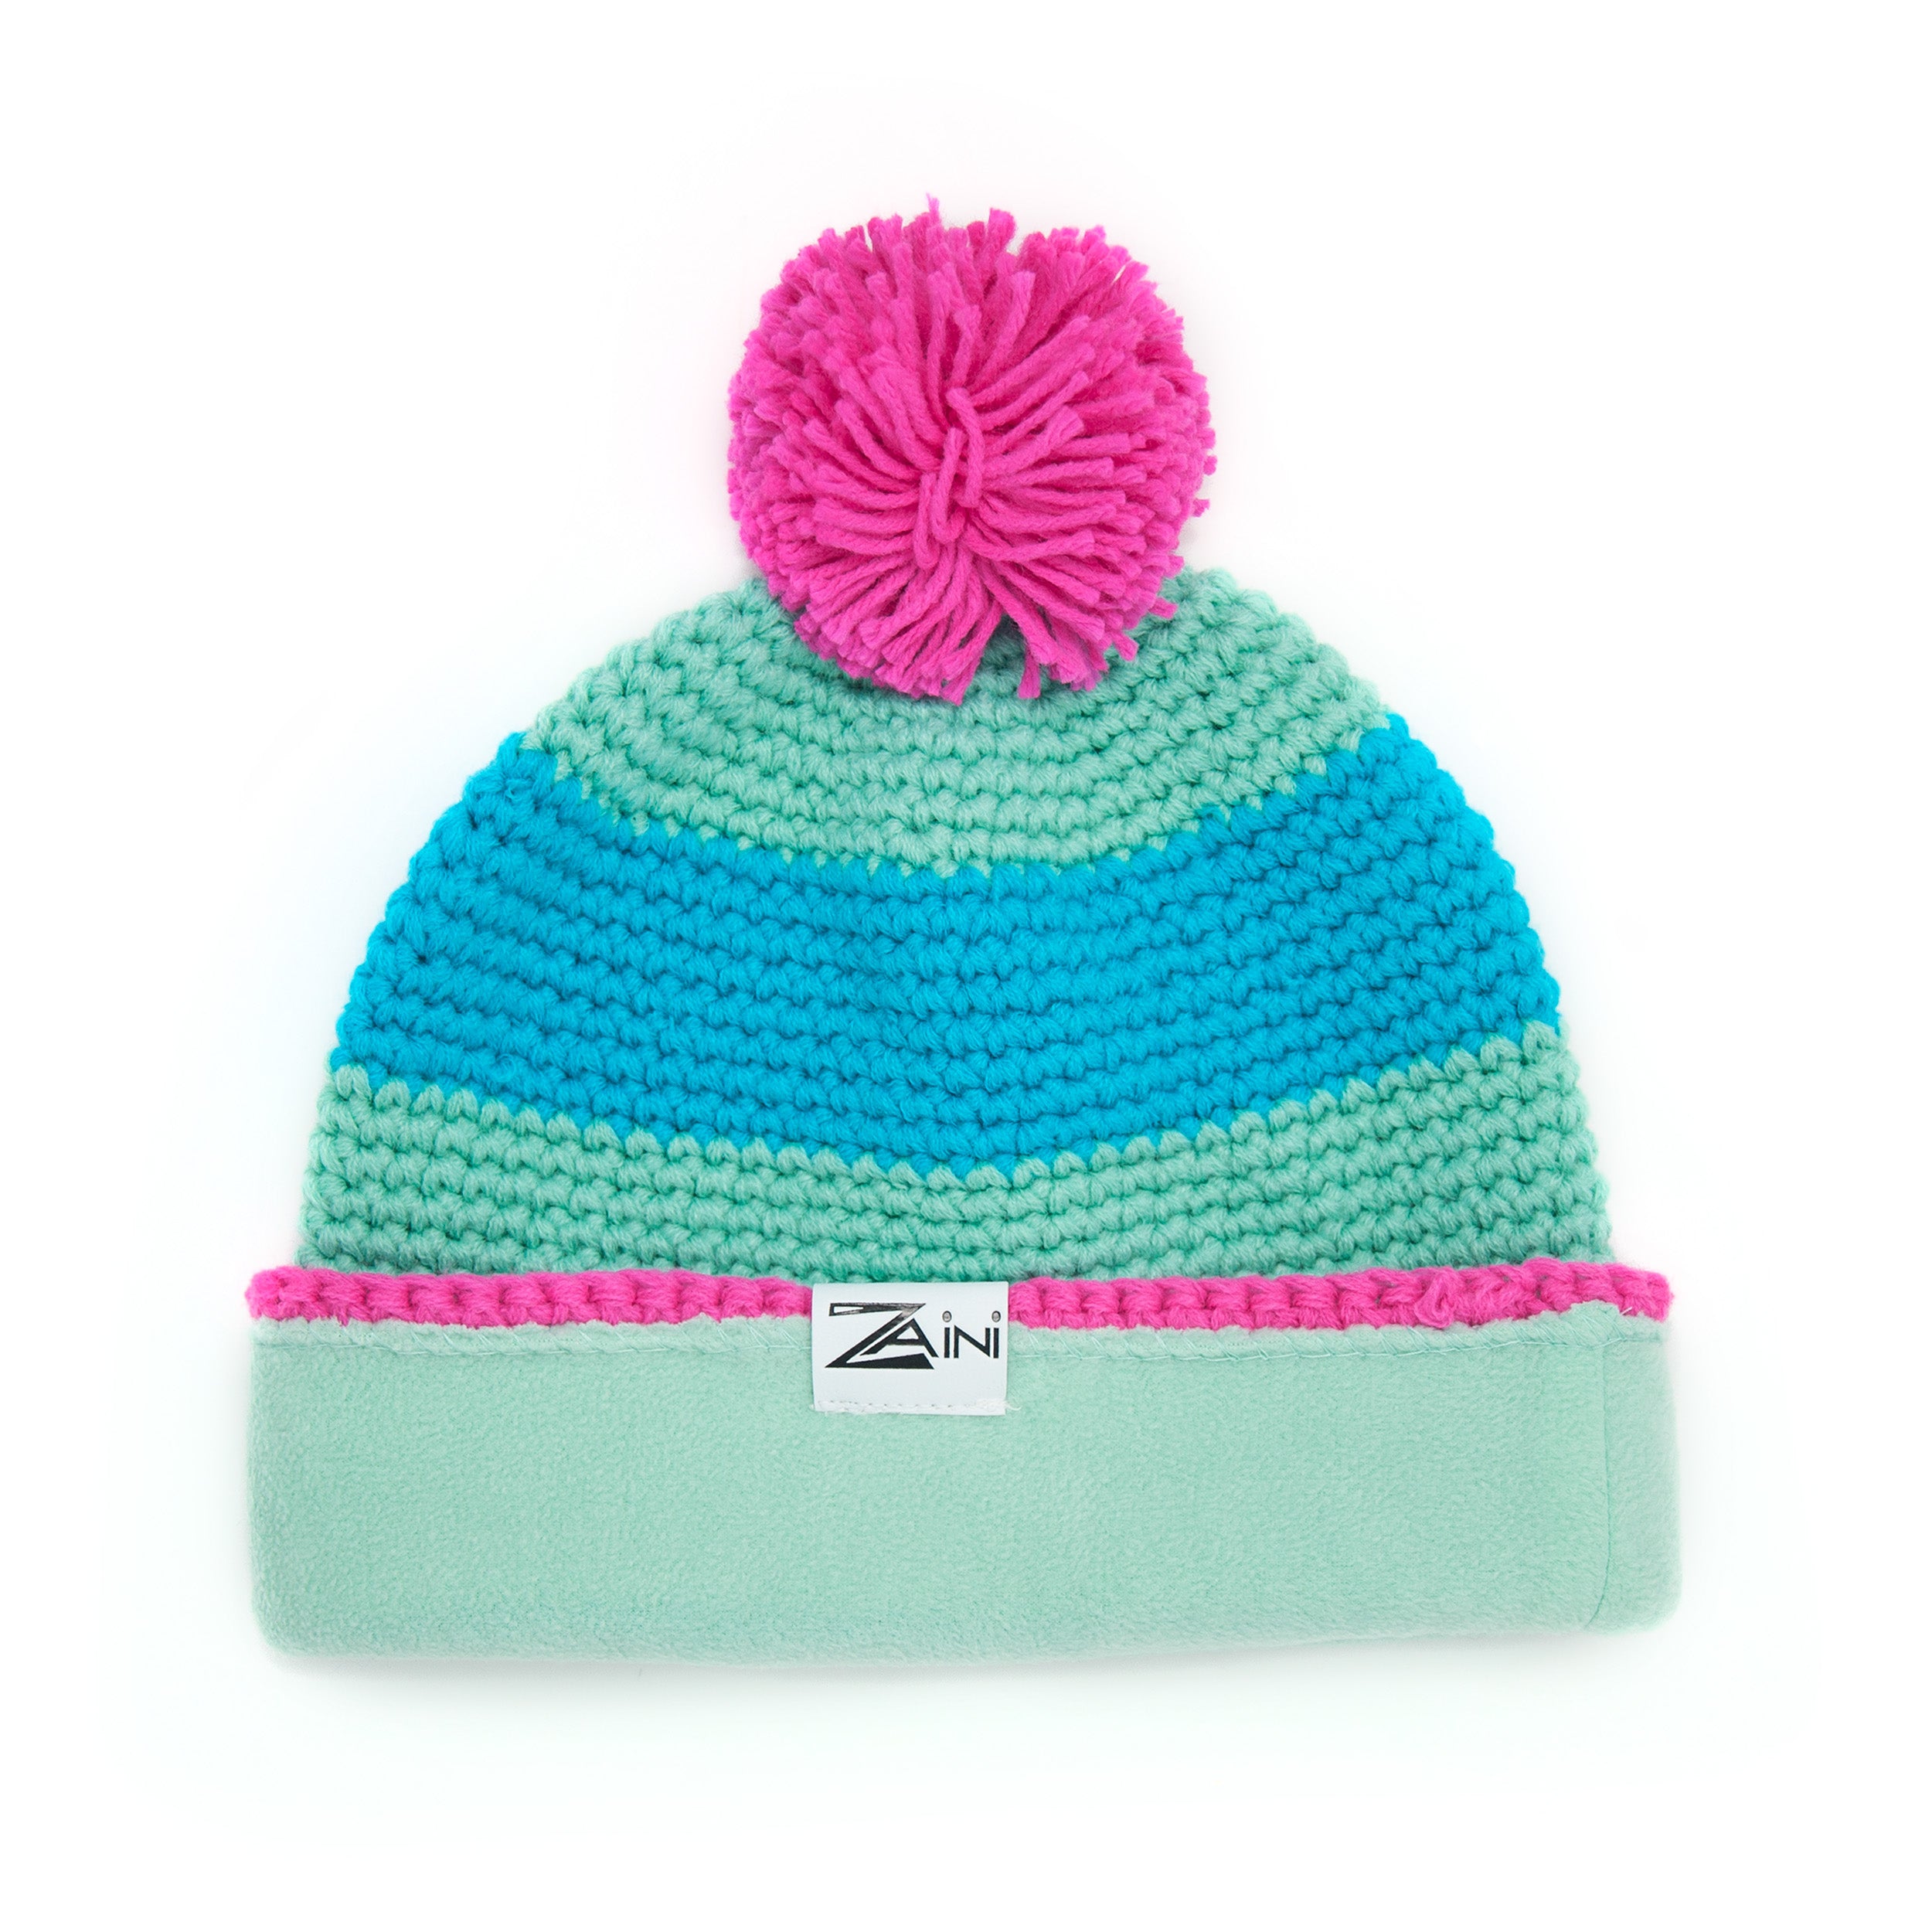 Archie 'Fleeced Lined' Beanie Bobble Hat